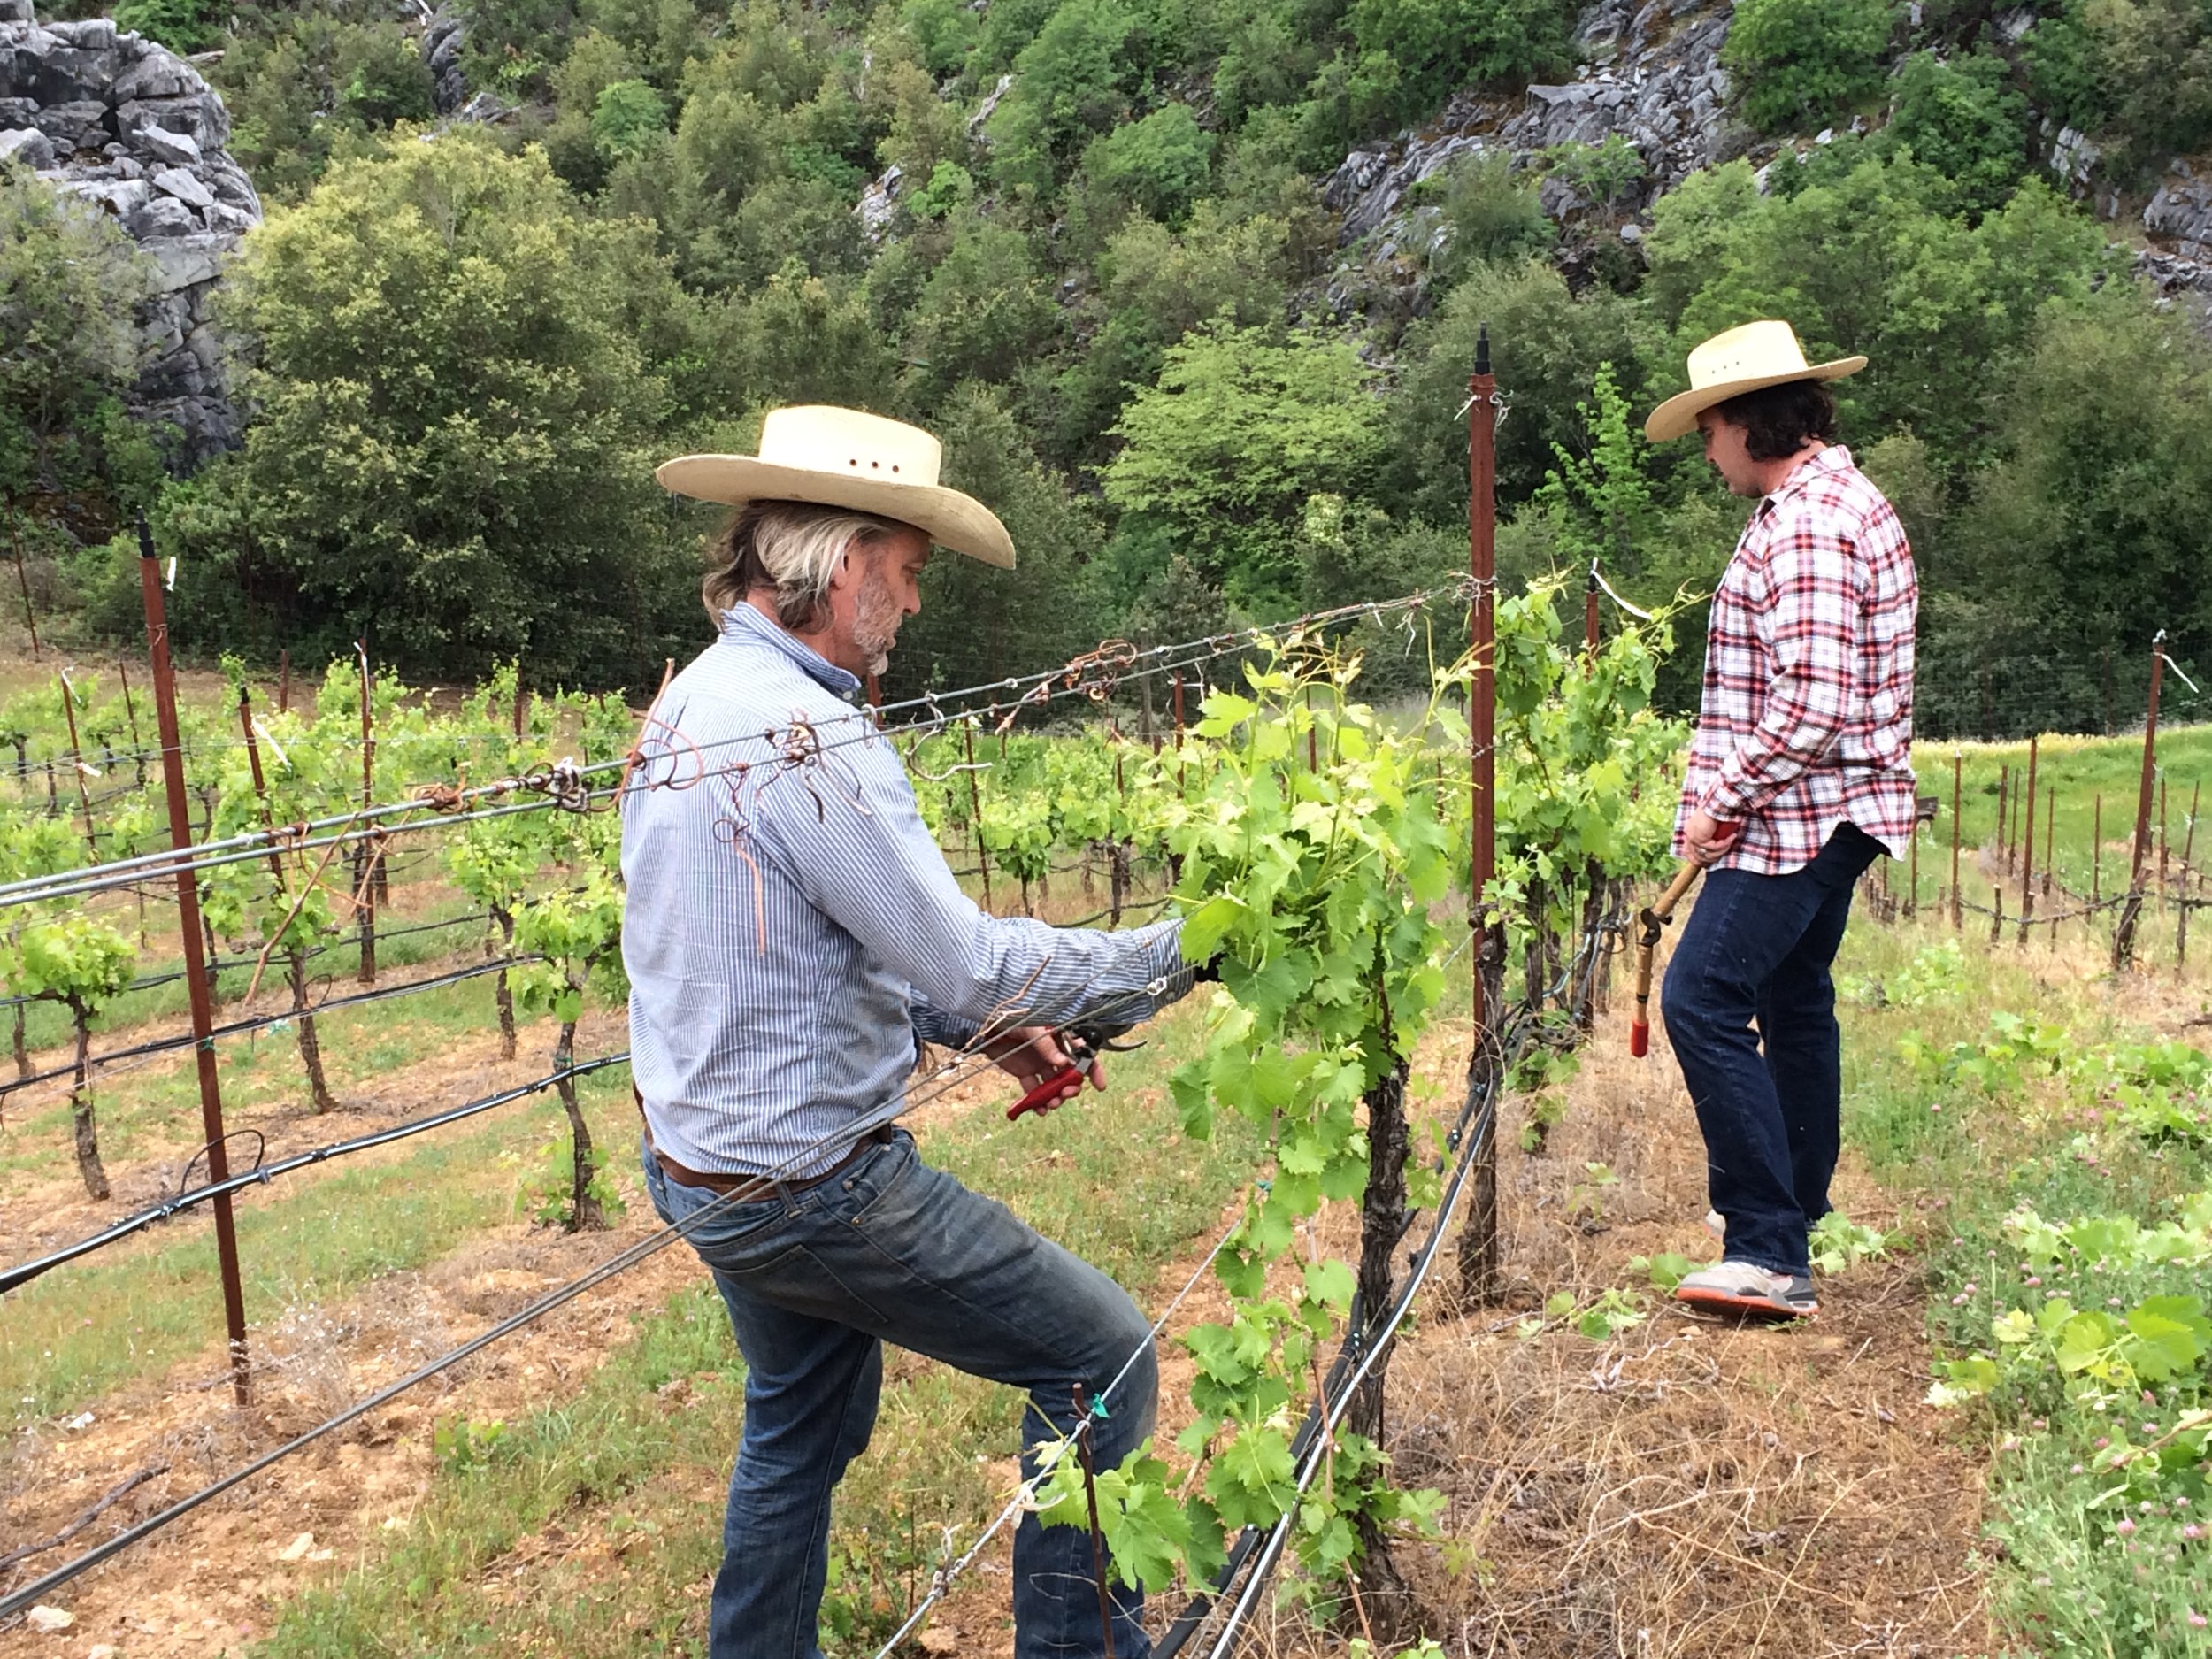 Two winemakers cutting back vines